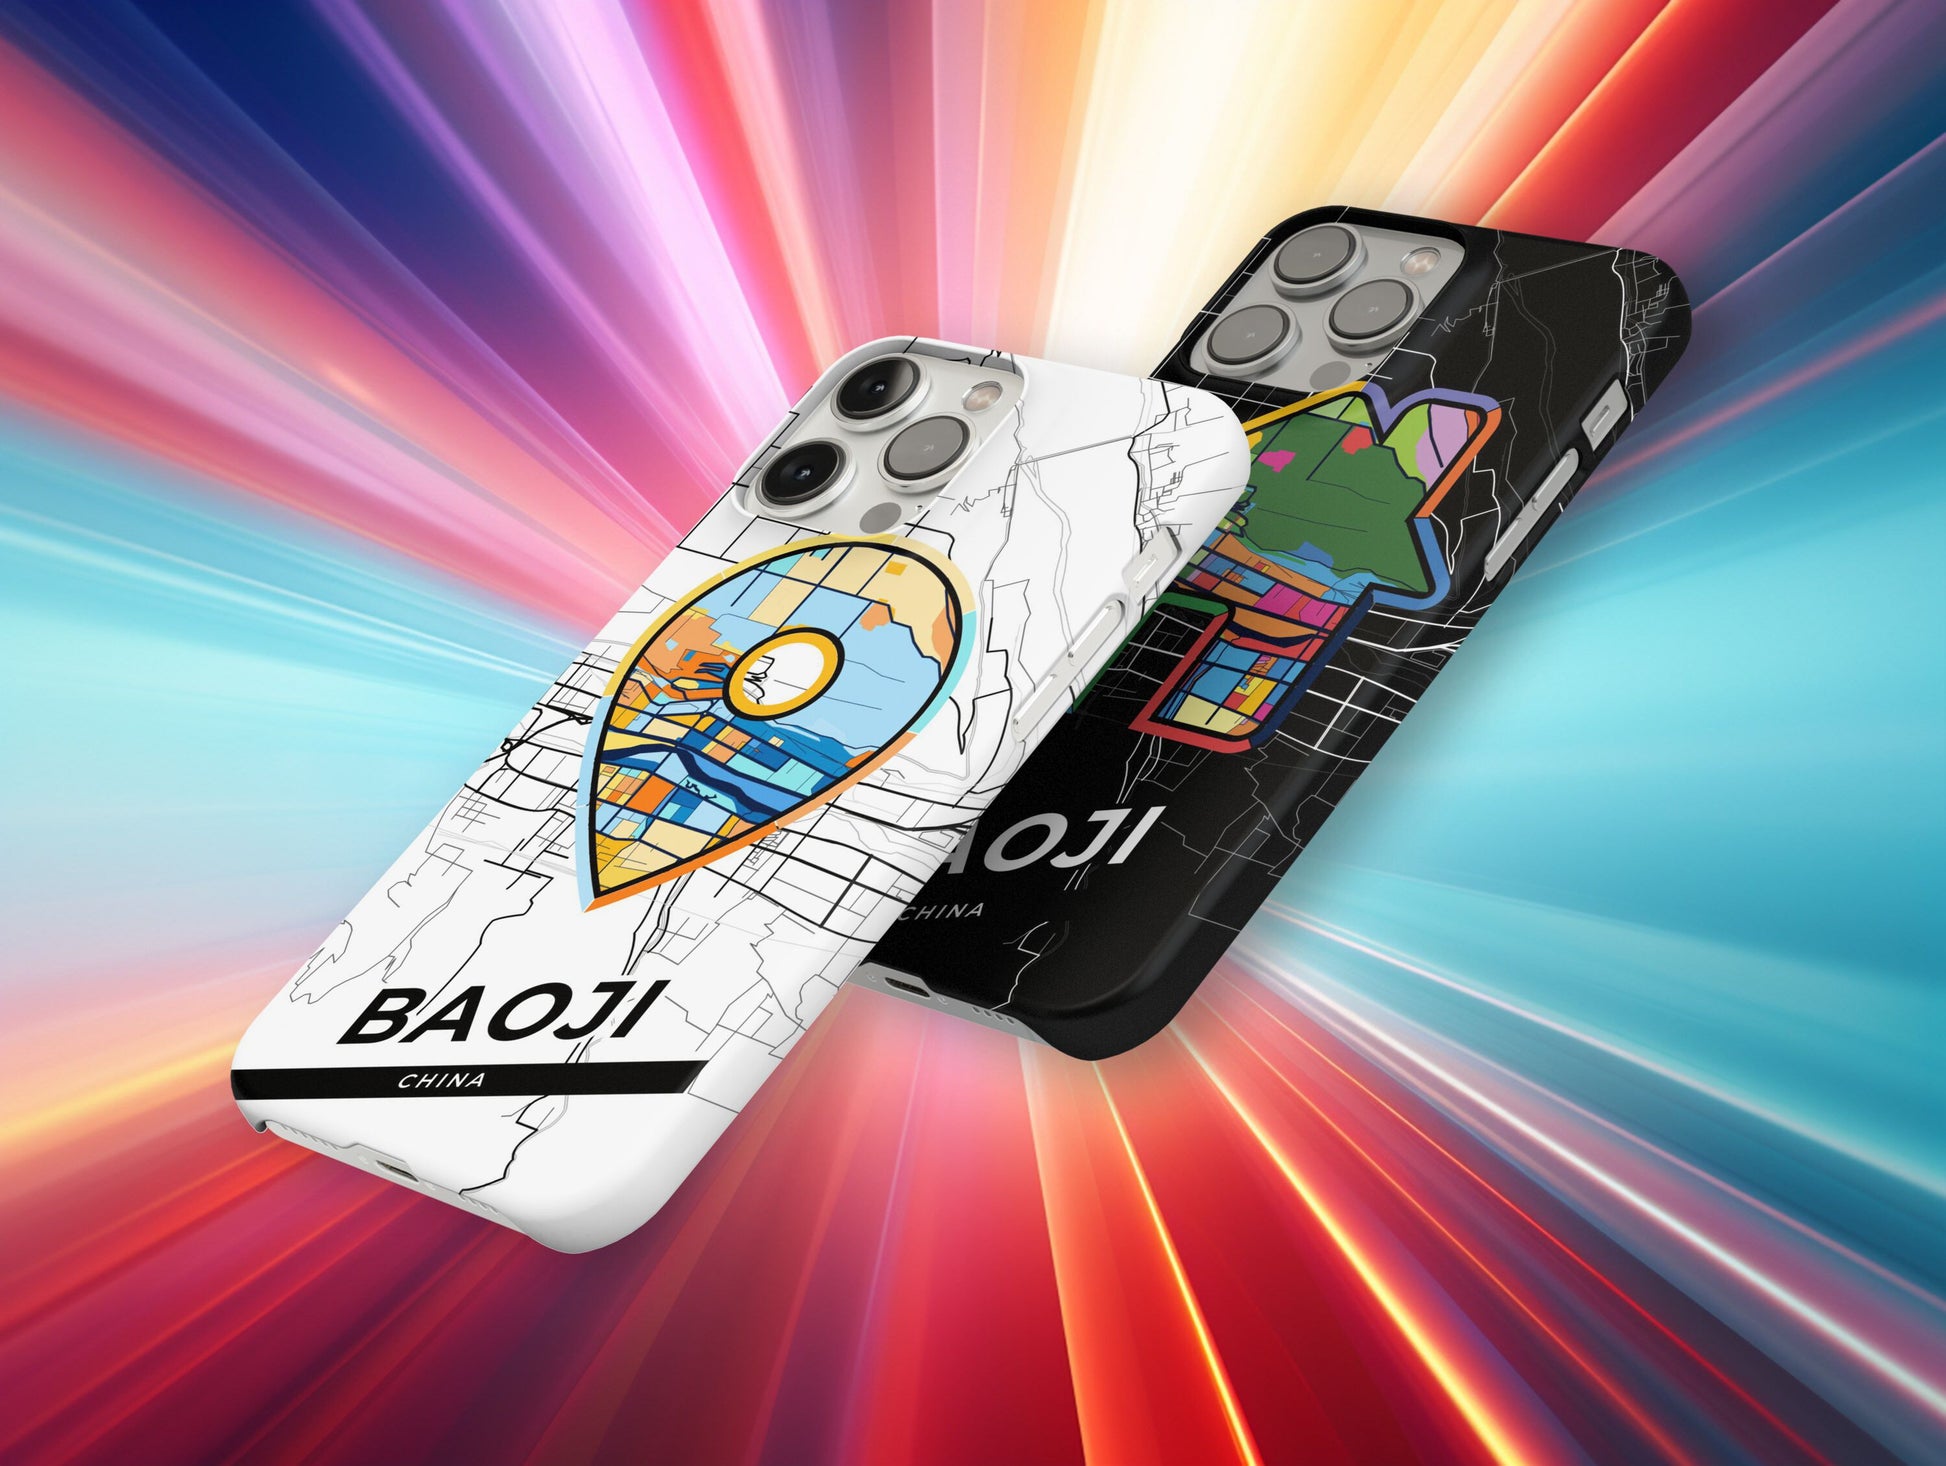 Baoji China slim phone case with colorful icon. Birthday, wedding or housewarming gift. Couple match cases.